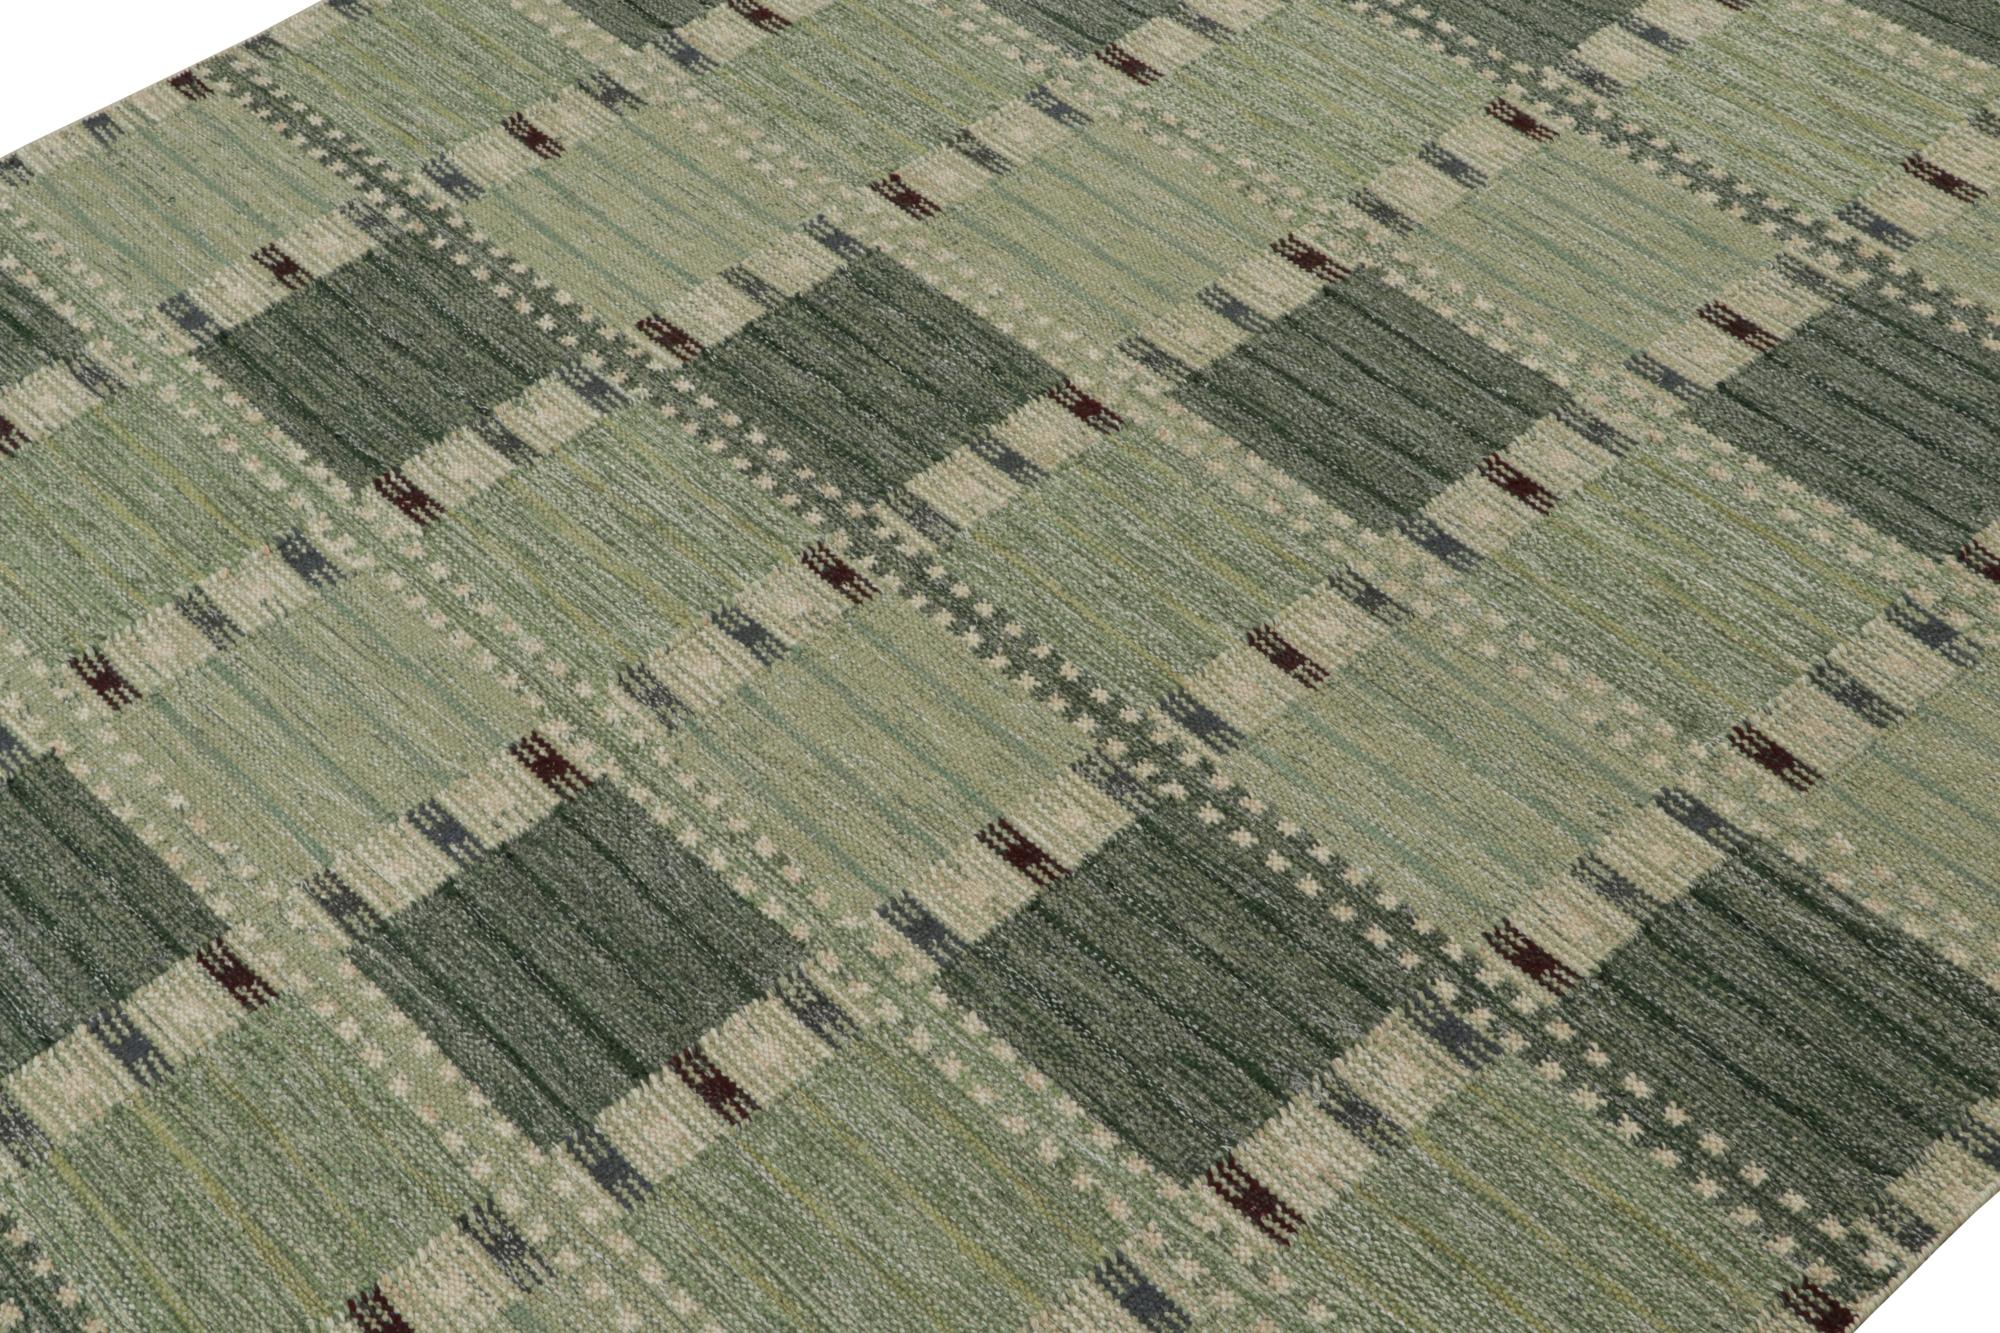 A smart 9x12 Swedish style kilim from our award-winning Scandinavian flat weave collection. Handwoven in wool. 

On the Design: 

This rug enjoys geometric patterns in enticing tones of green with subtle cream & brown accents. Keen eyes will